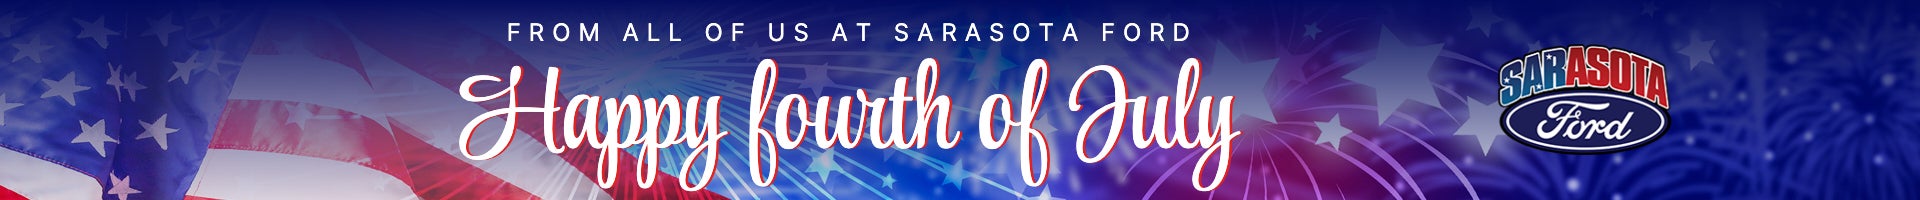 Happy Fourth of July from Sarasota Ford